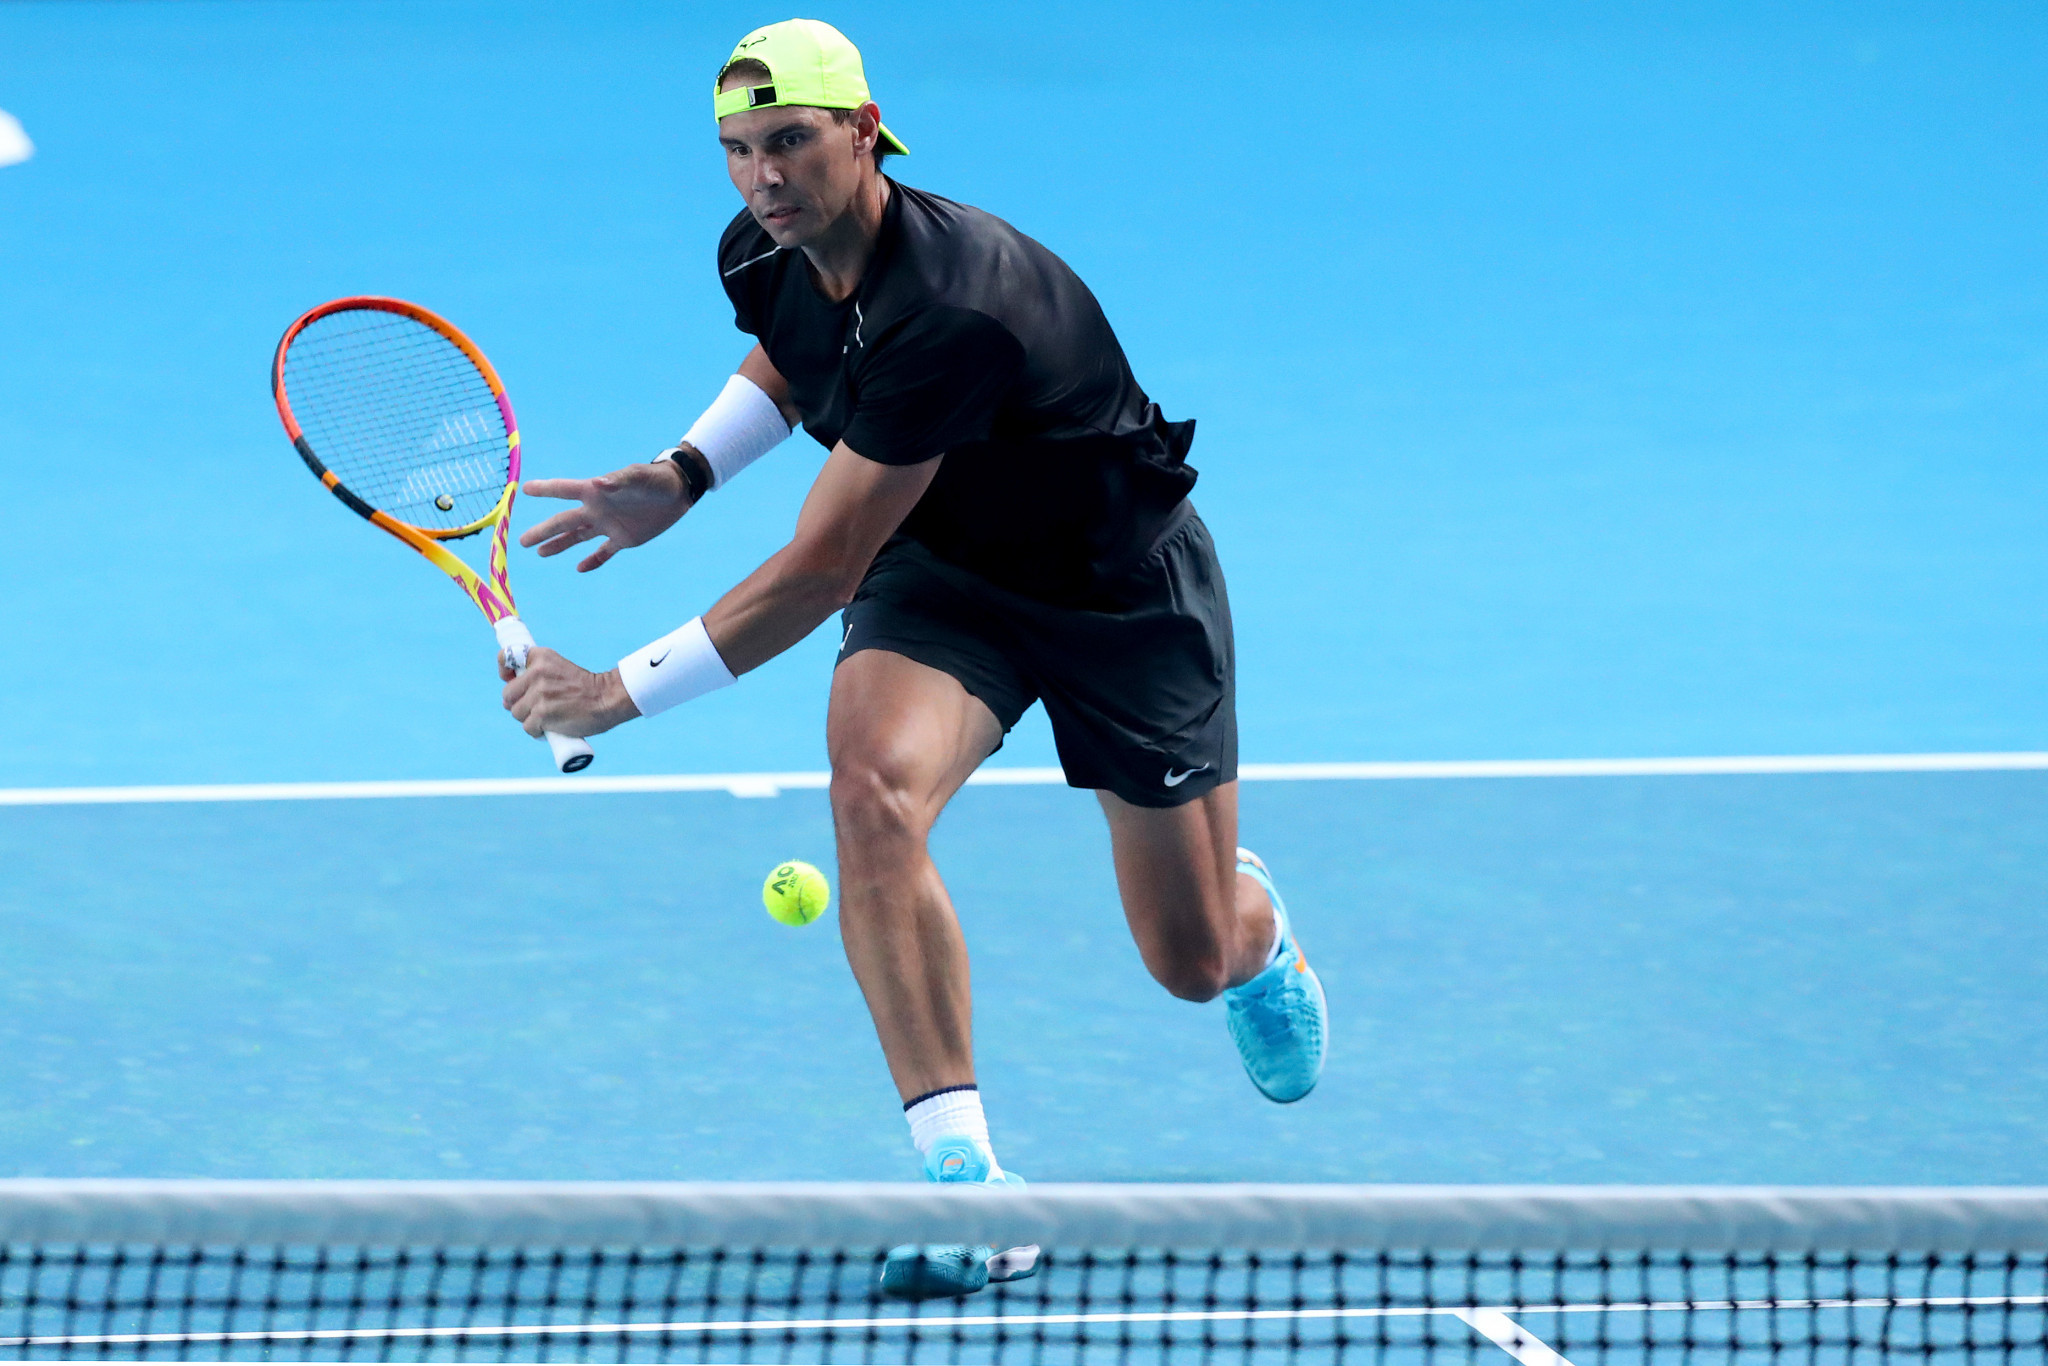 Top men’s and women’s seeds face tough opening matches at Australian Open 